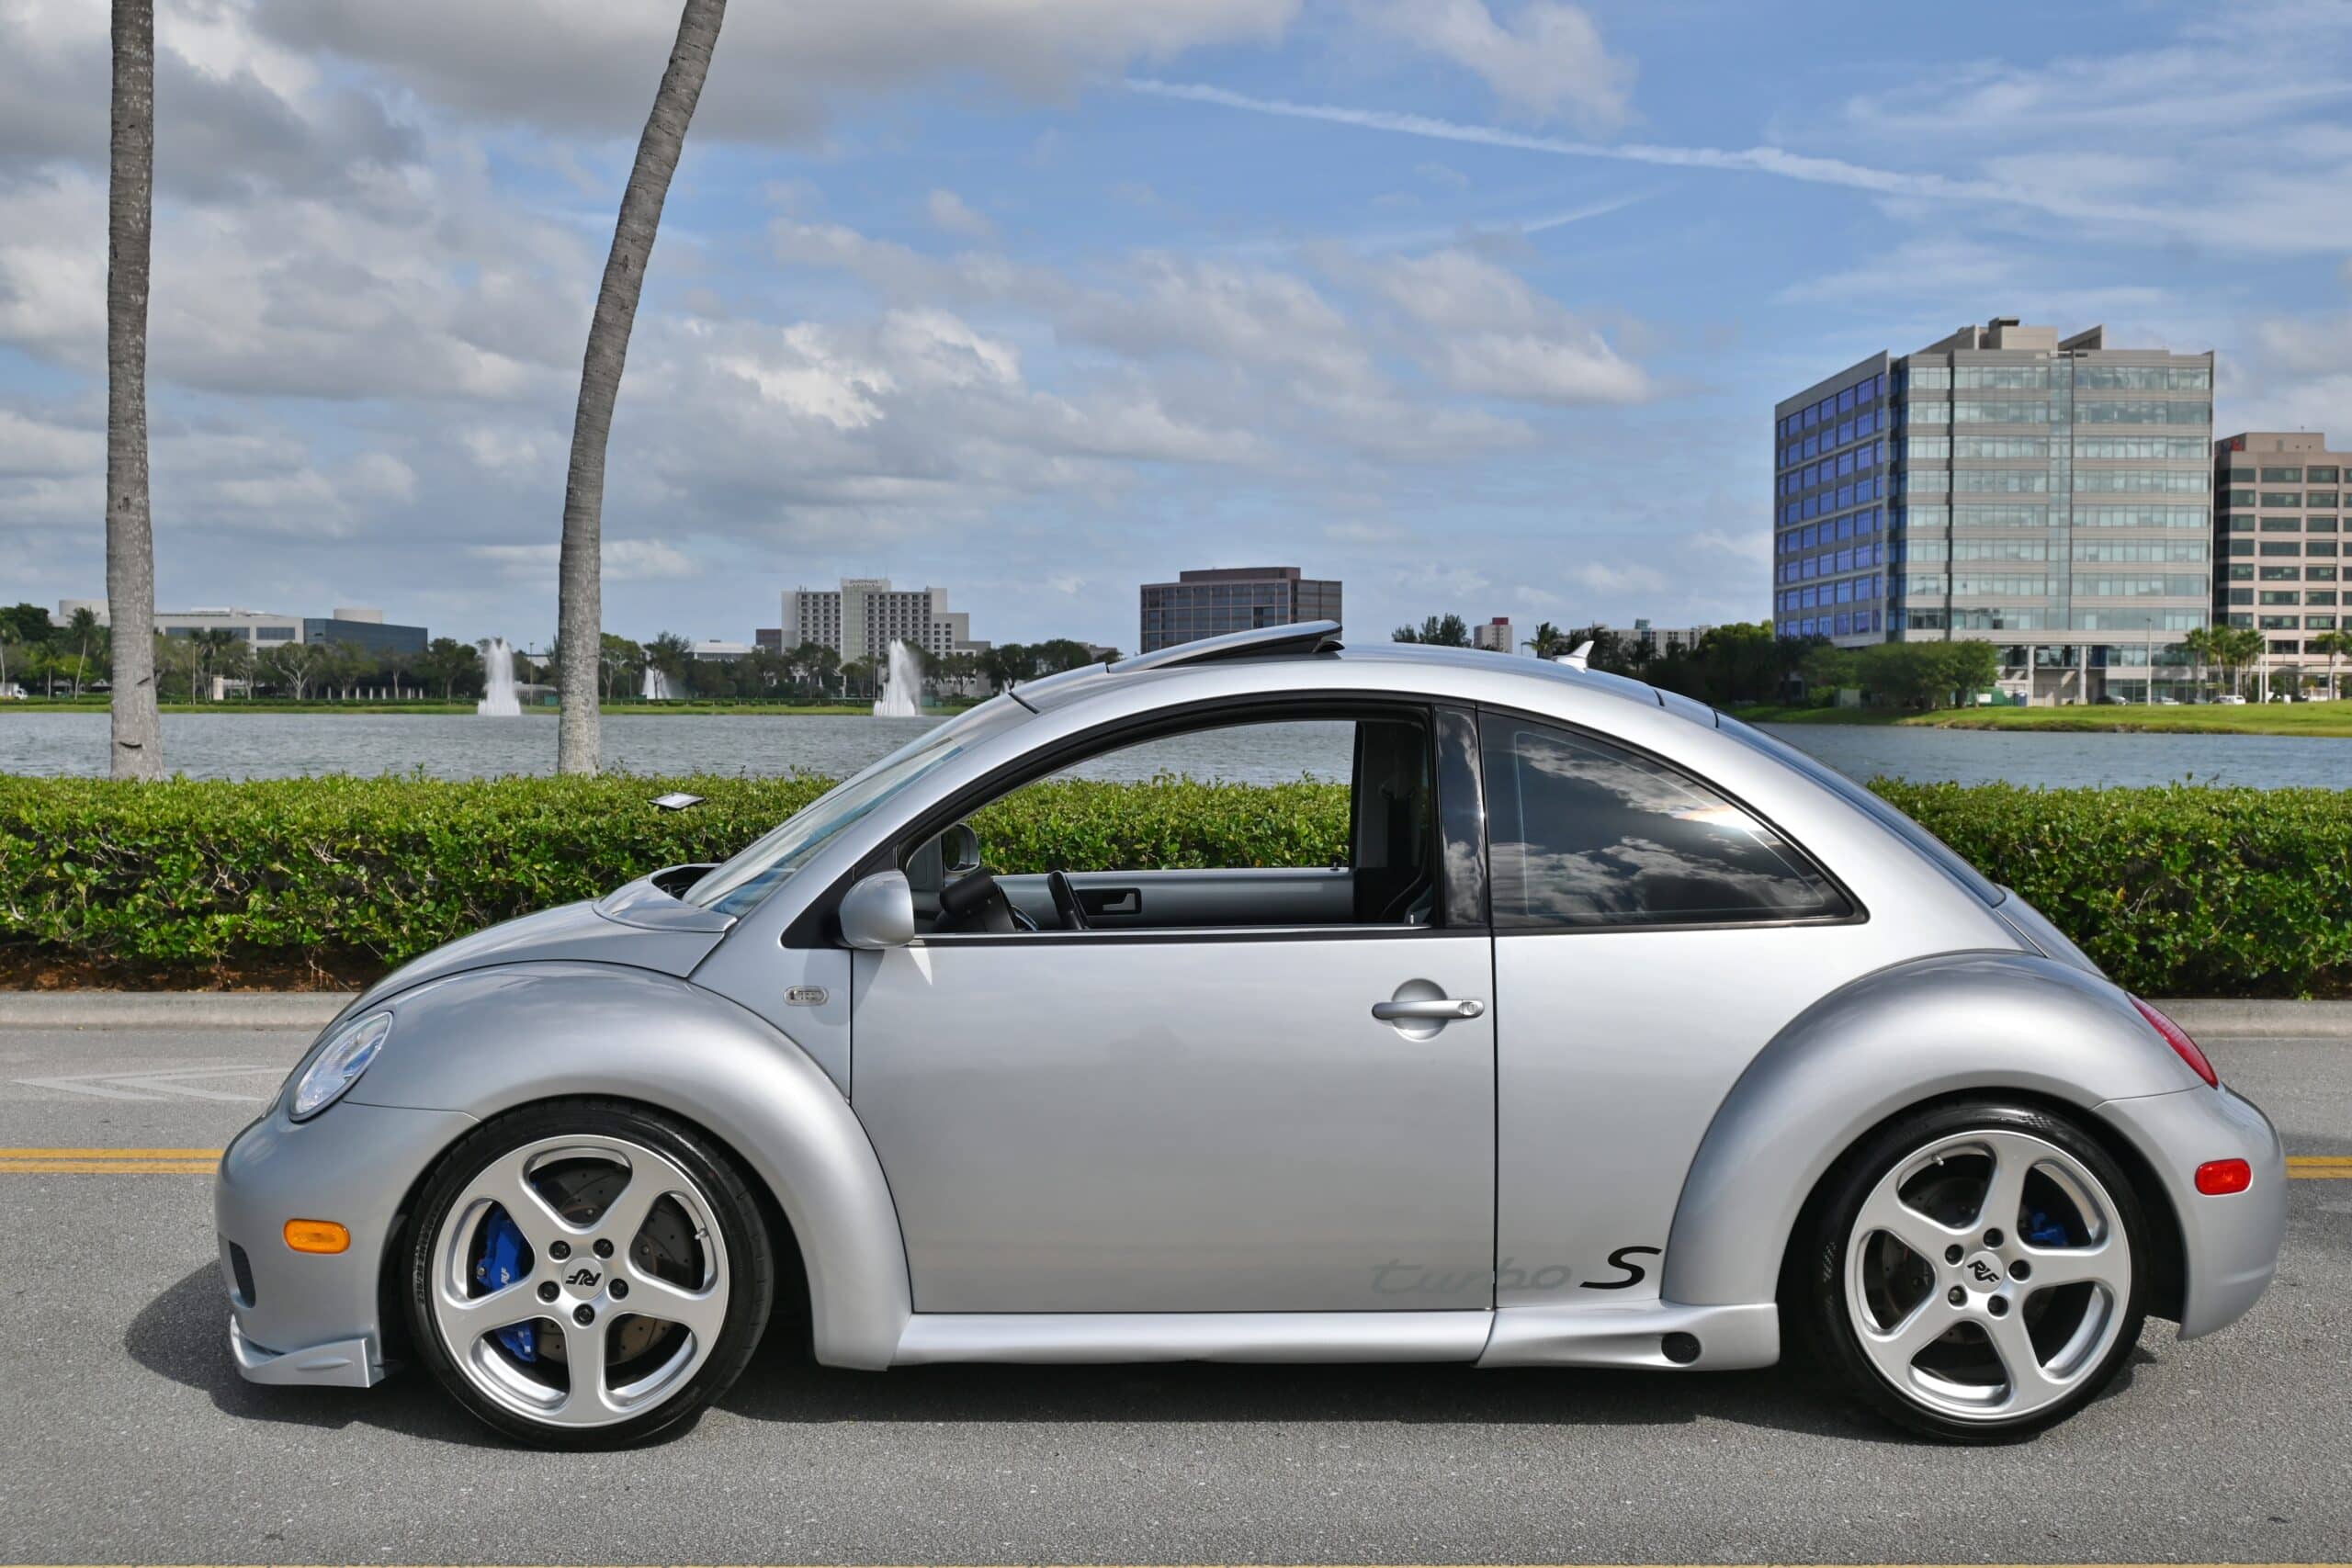 2002 Volkswagen Beetle RUF Turbo S 1 of 1 Built in collaboration with RUF /  6 Speed Manual / Custom RUF Modified - RMCMiami